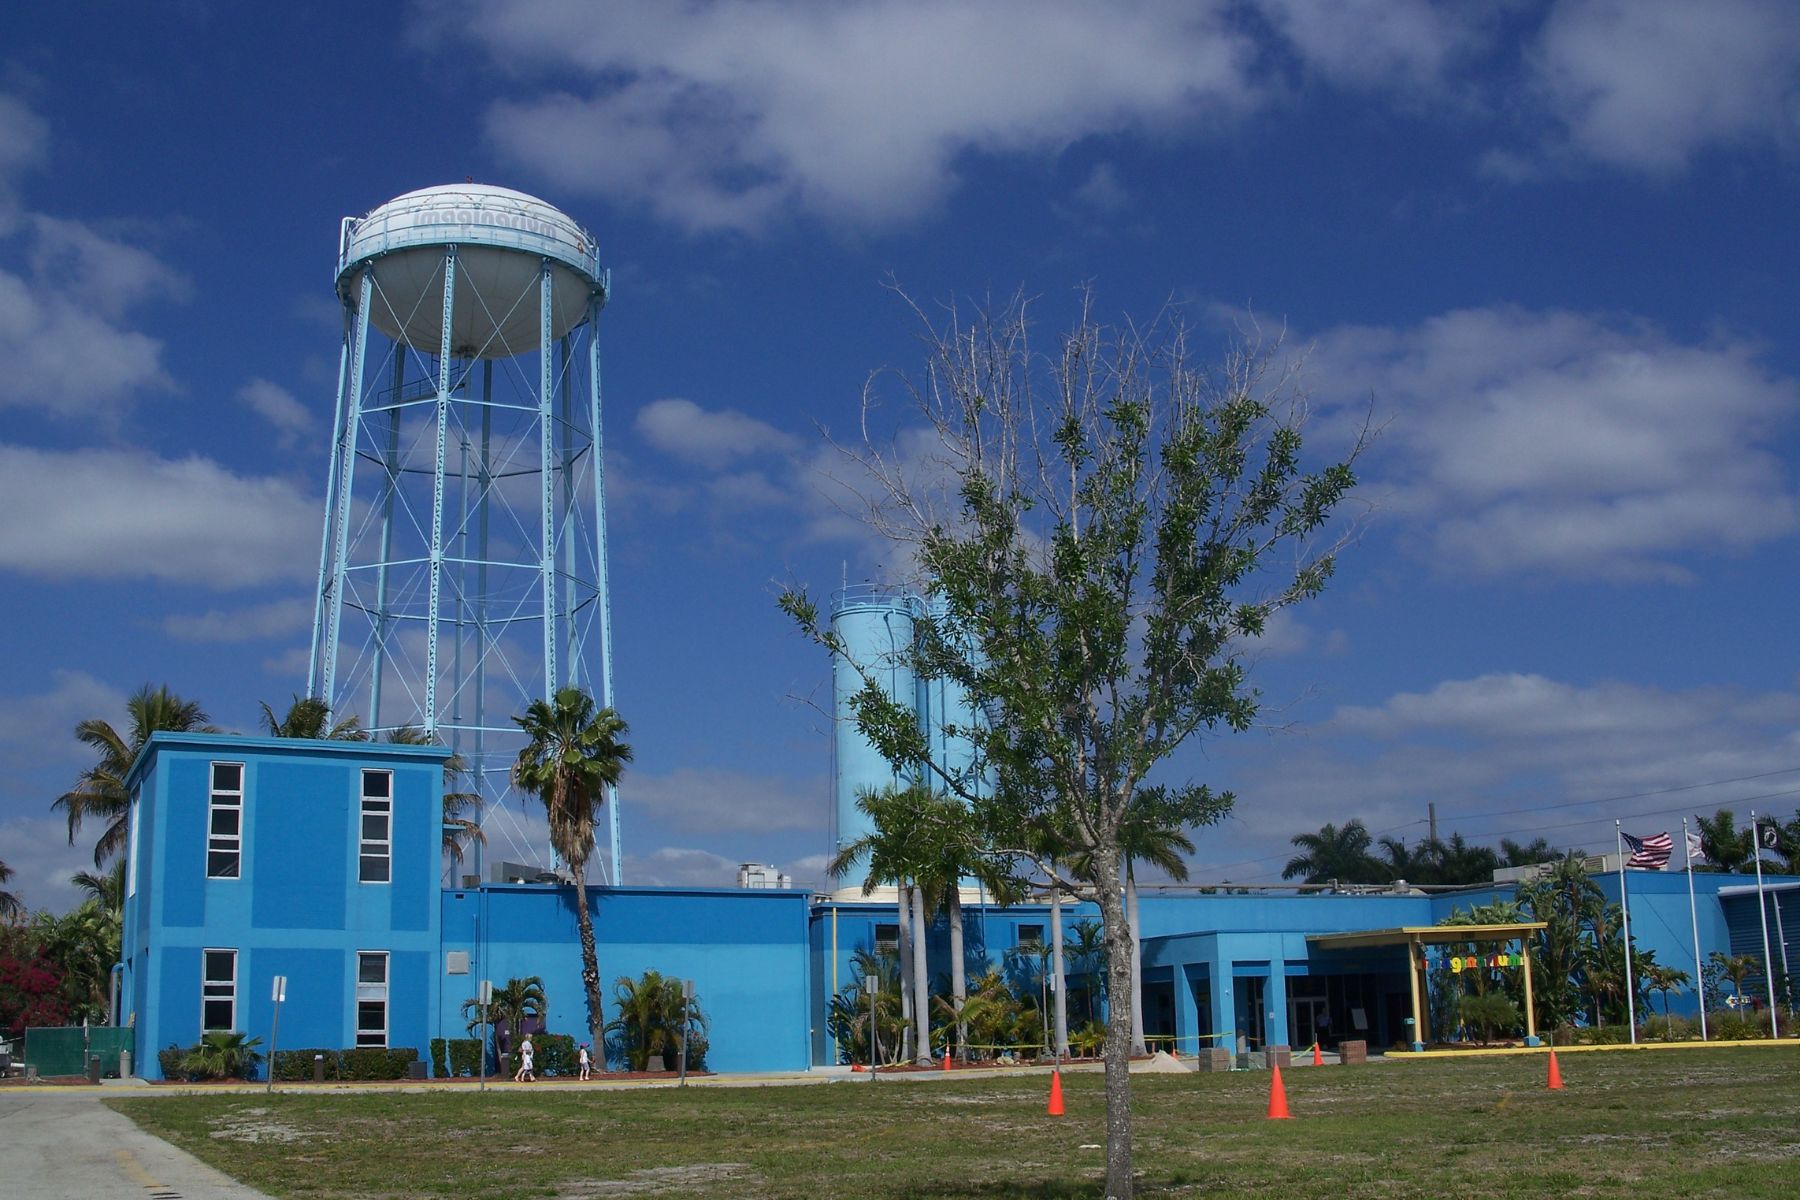 Exterior of the IMAG History and Science Center (with old sign: Imaginarium) in Fort Myers, Florida